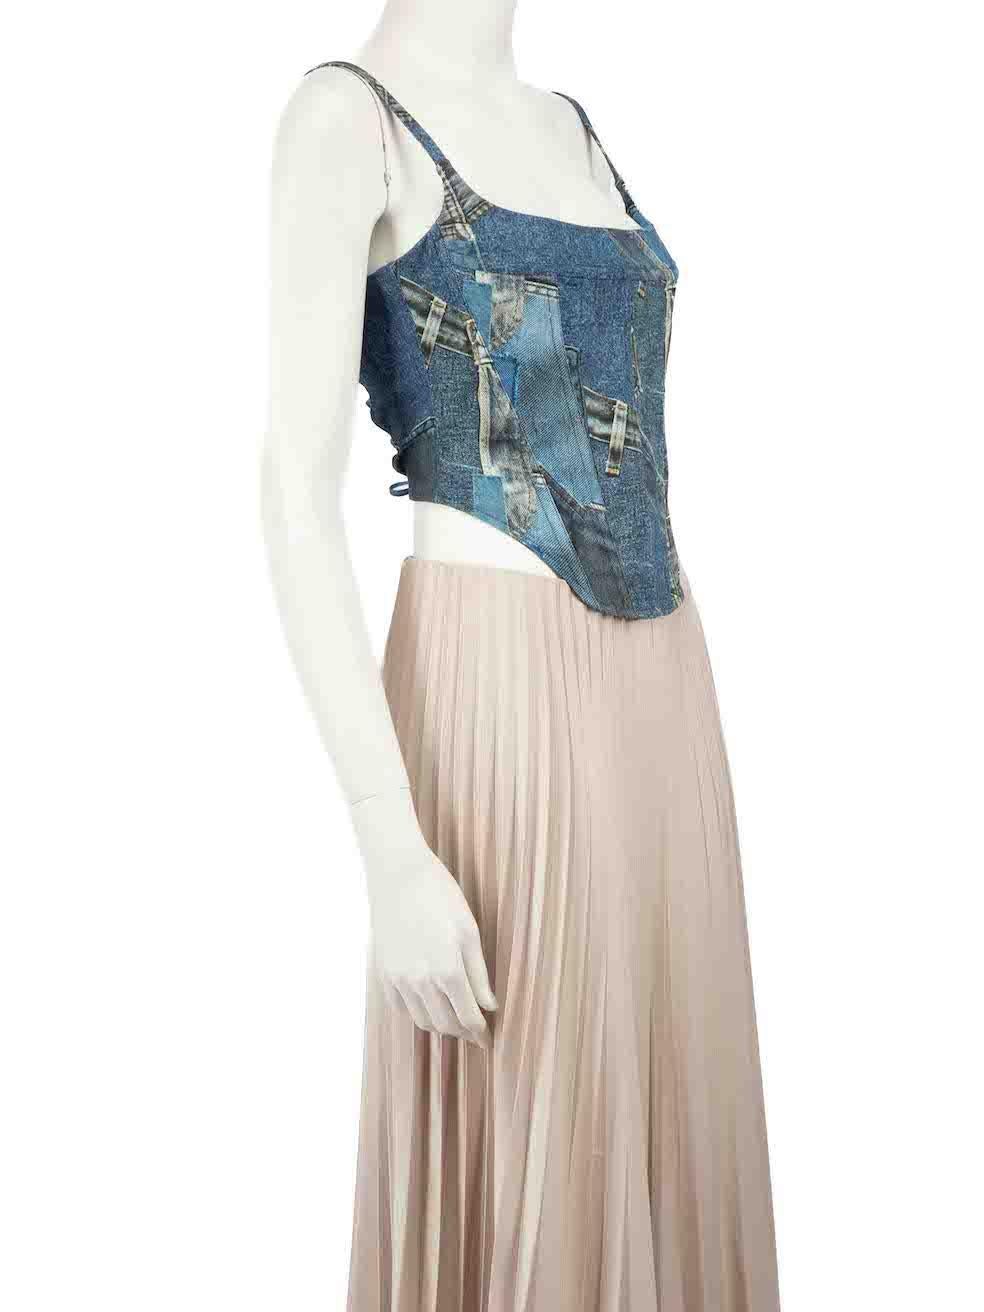 CONDITION is Never worn, with tags. No visible wear to top is evident on this new Miaou designer resale item.
 
 
 
 Details
 
 
 Blue
 
 Cotton
 
 Corset top
 
 Sleeveless
 
 Graphic patchwork printed
 
 Cropped length
 
 Back lace up closure
 
 
